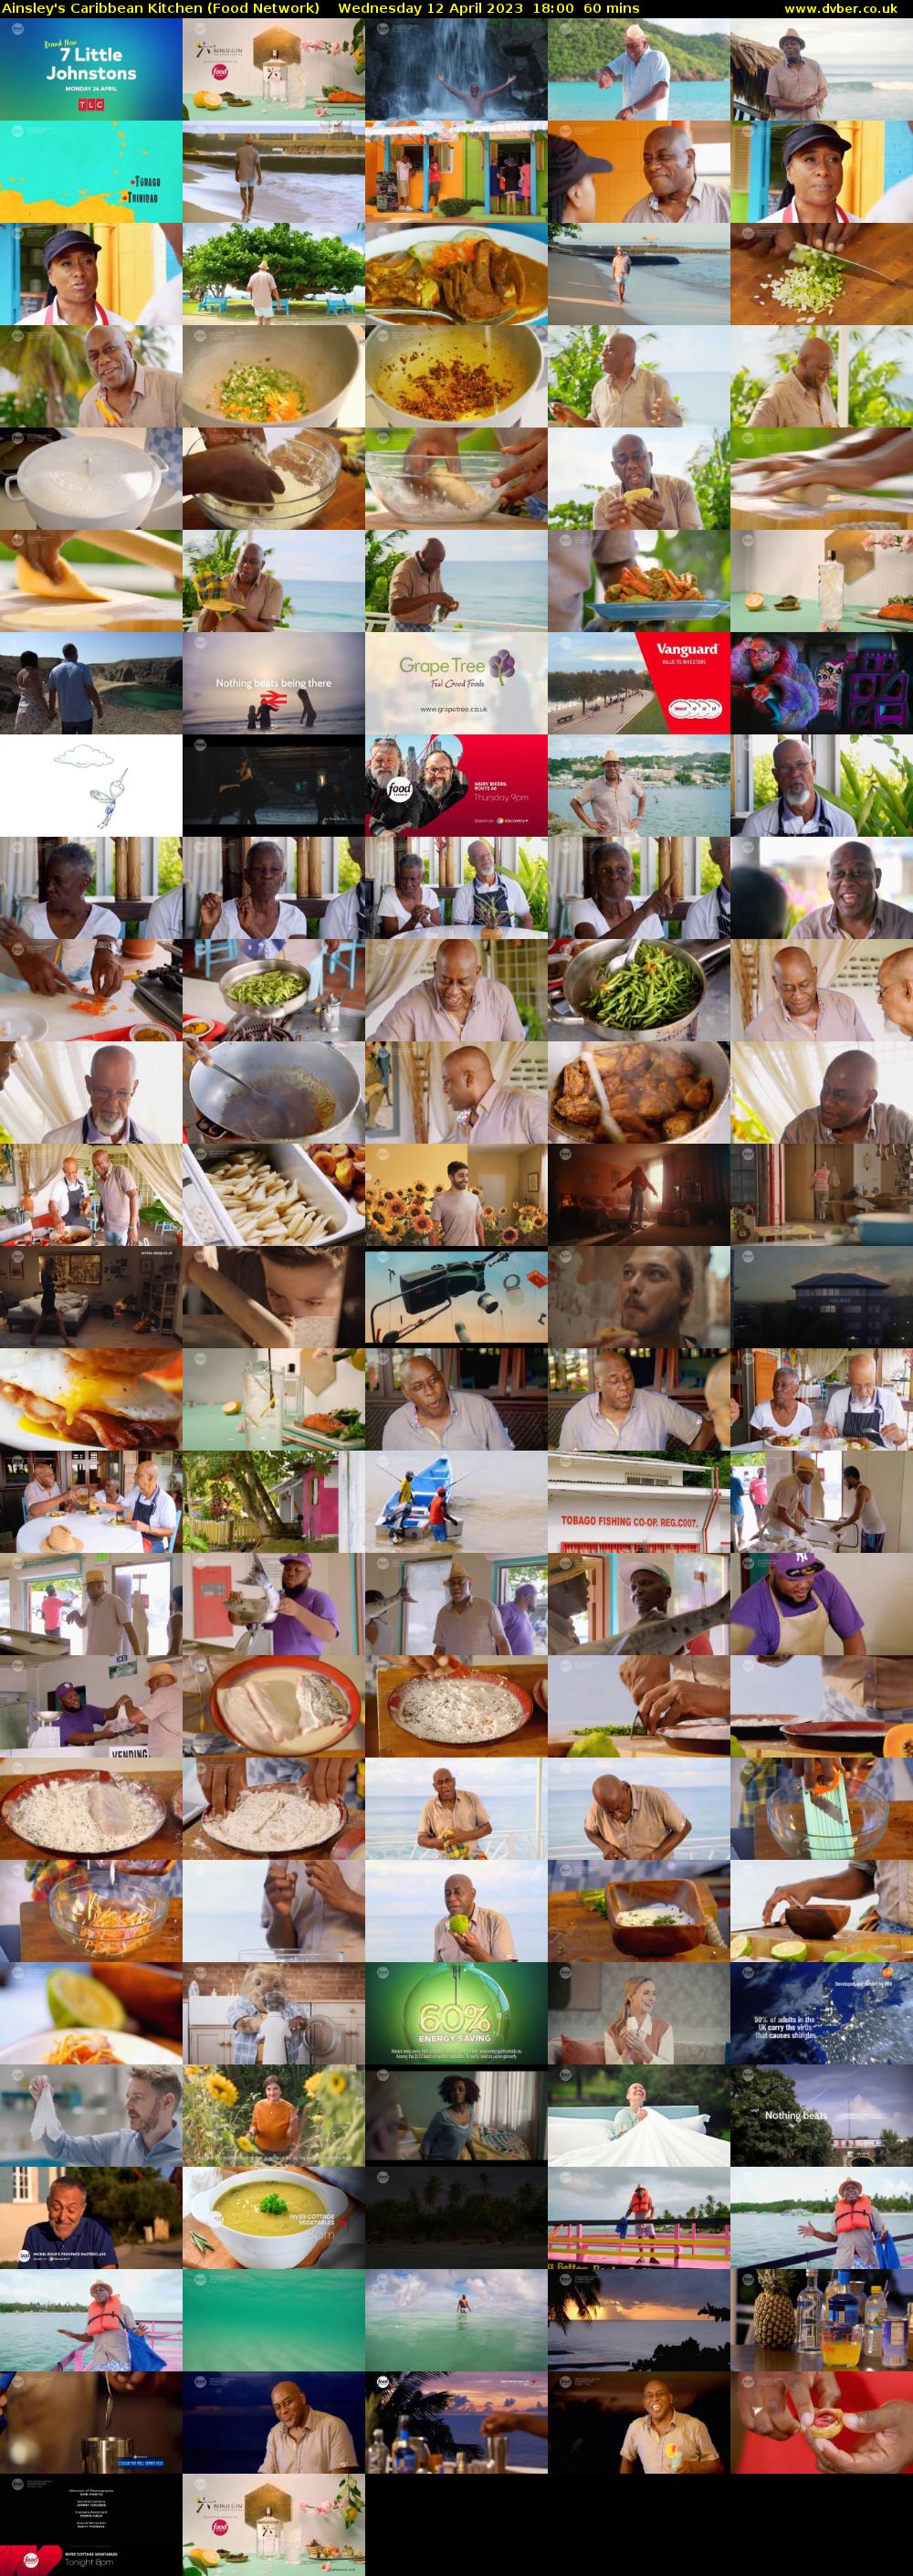 Ainsley's Caribbean Kitchen (Food Network) Wednesday 12 April 2023 18:00 - 19:00